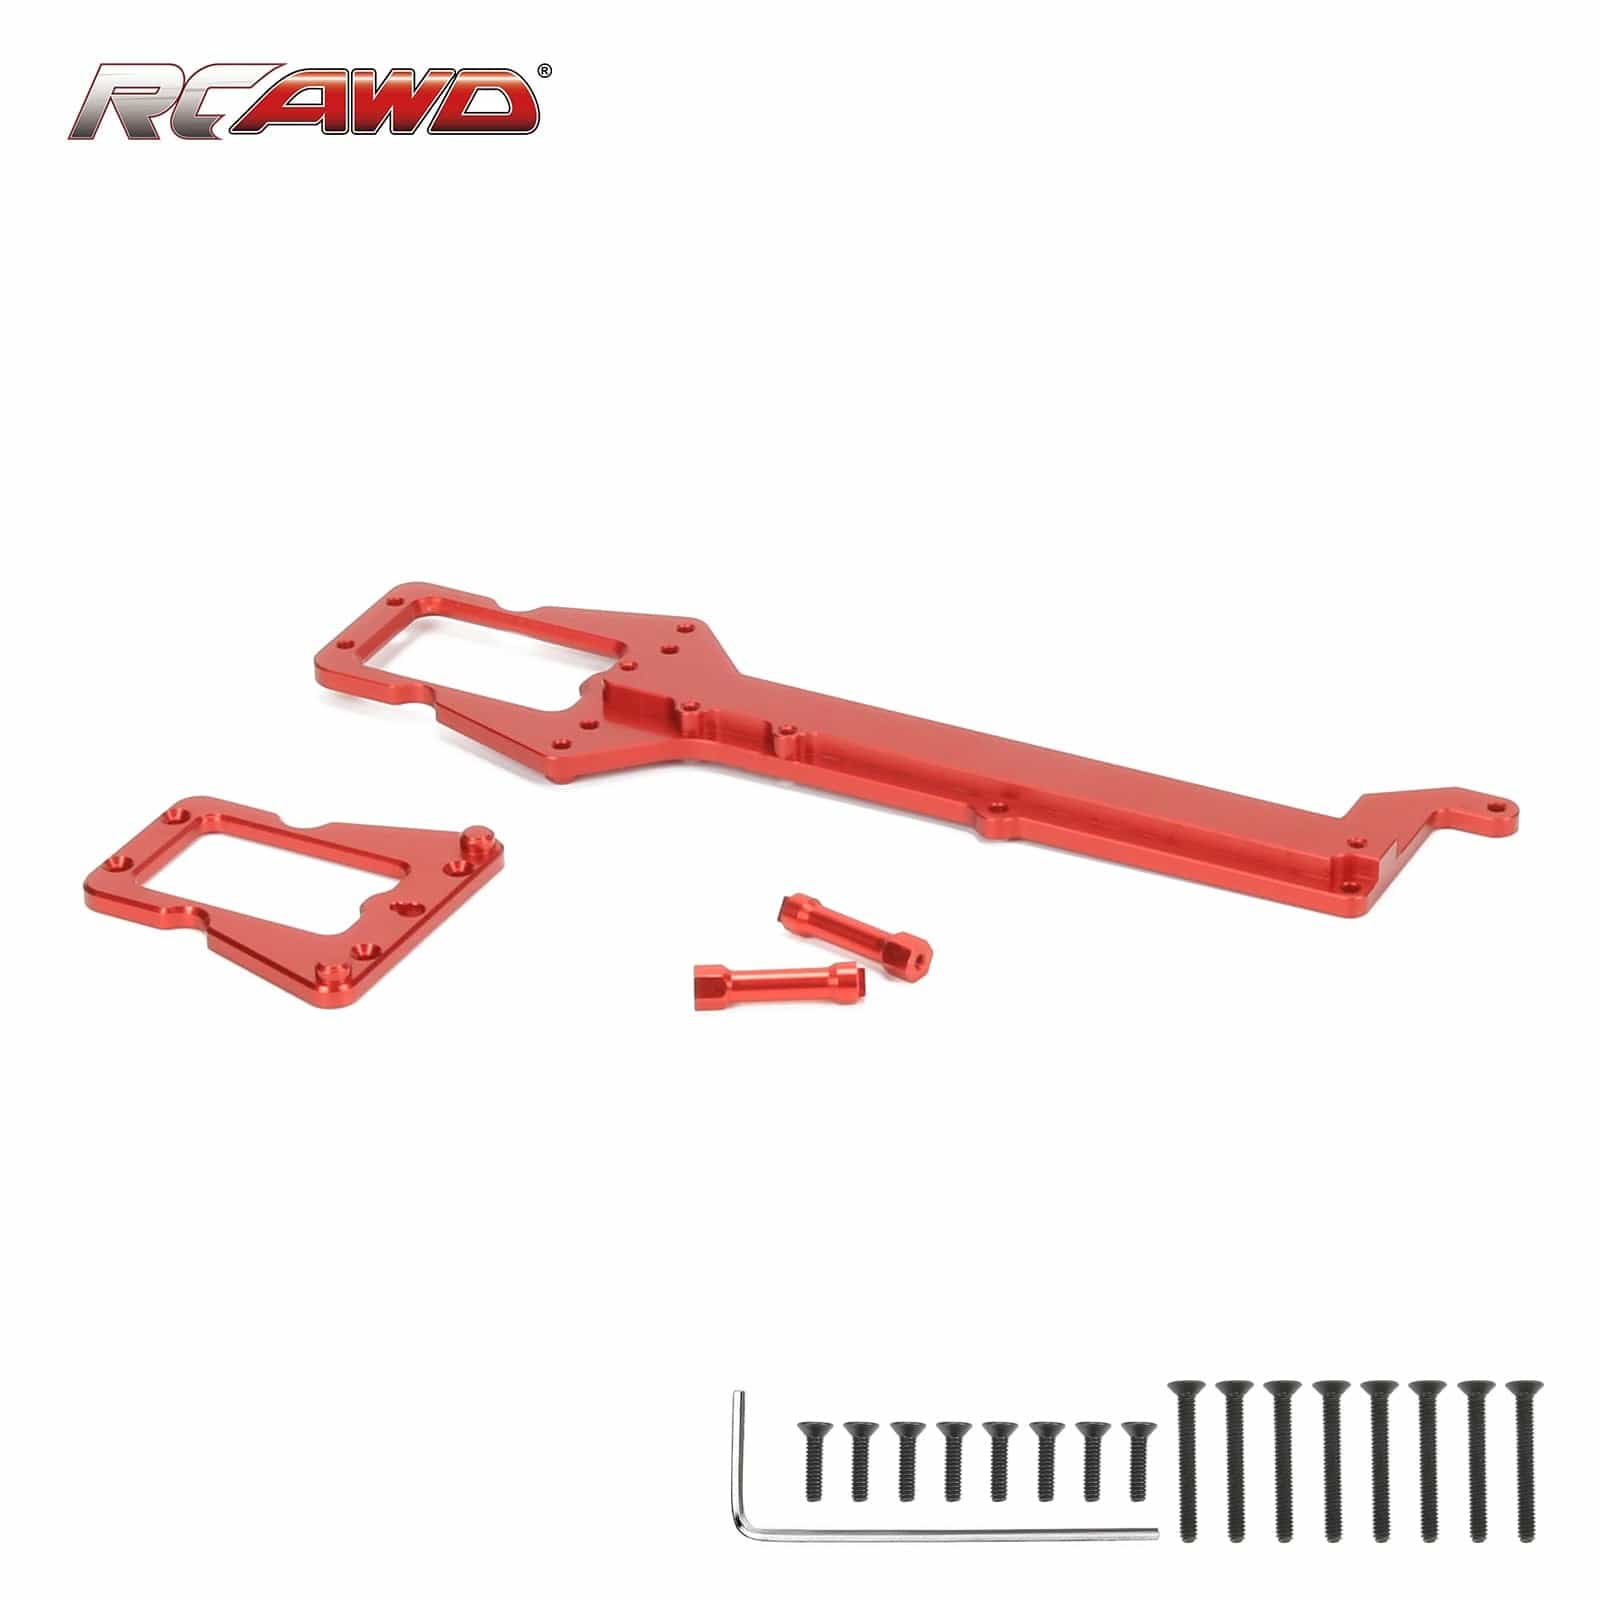 RCAWD TRAXXAS UPGRADE PARTS RCAWD Aluminum Upper Chassis for 1/18 Traxxas Latrax Upgrades